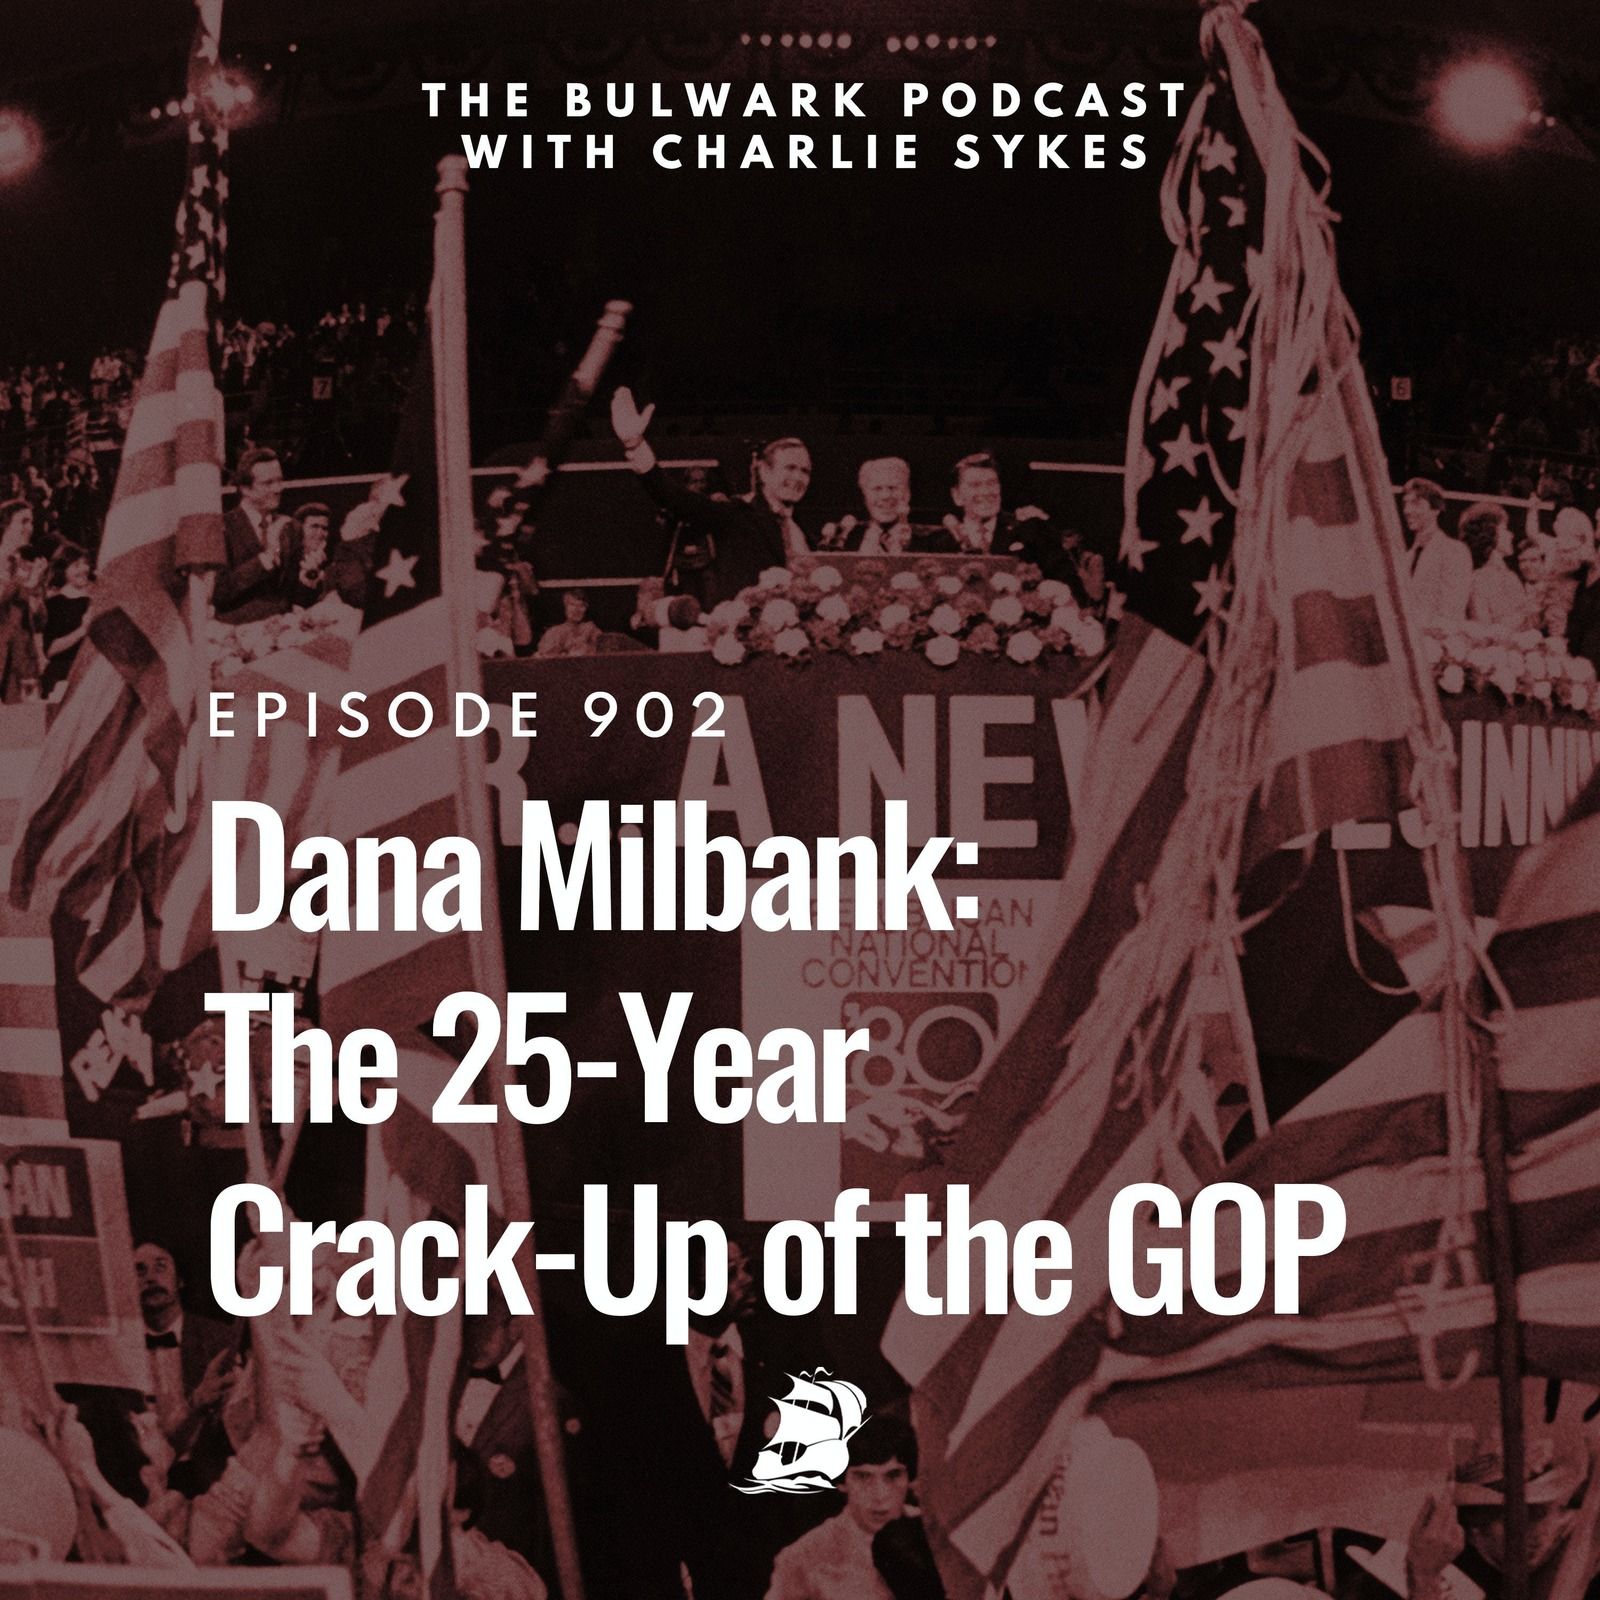 Dana Milbank: The 25-Year Crack-Up of the GOP by The Bulwark Podcast